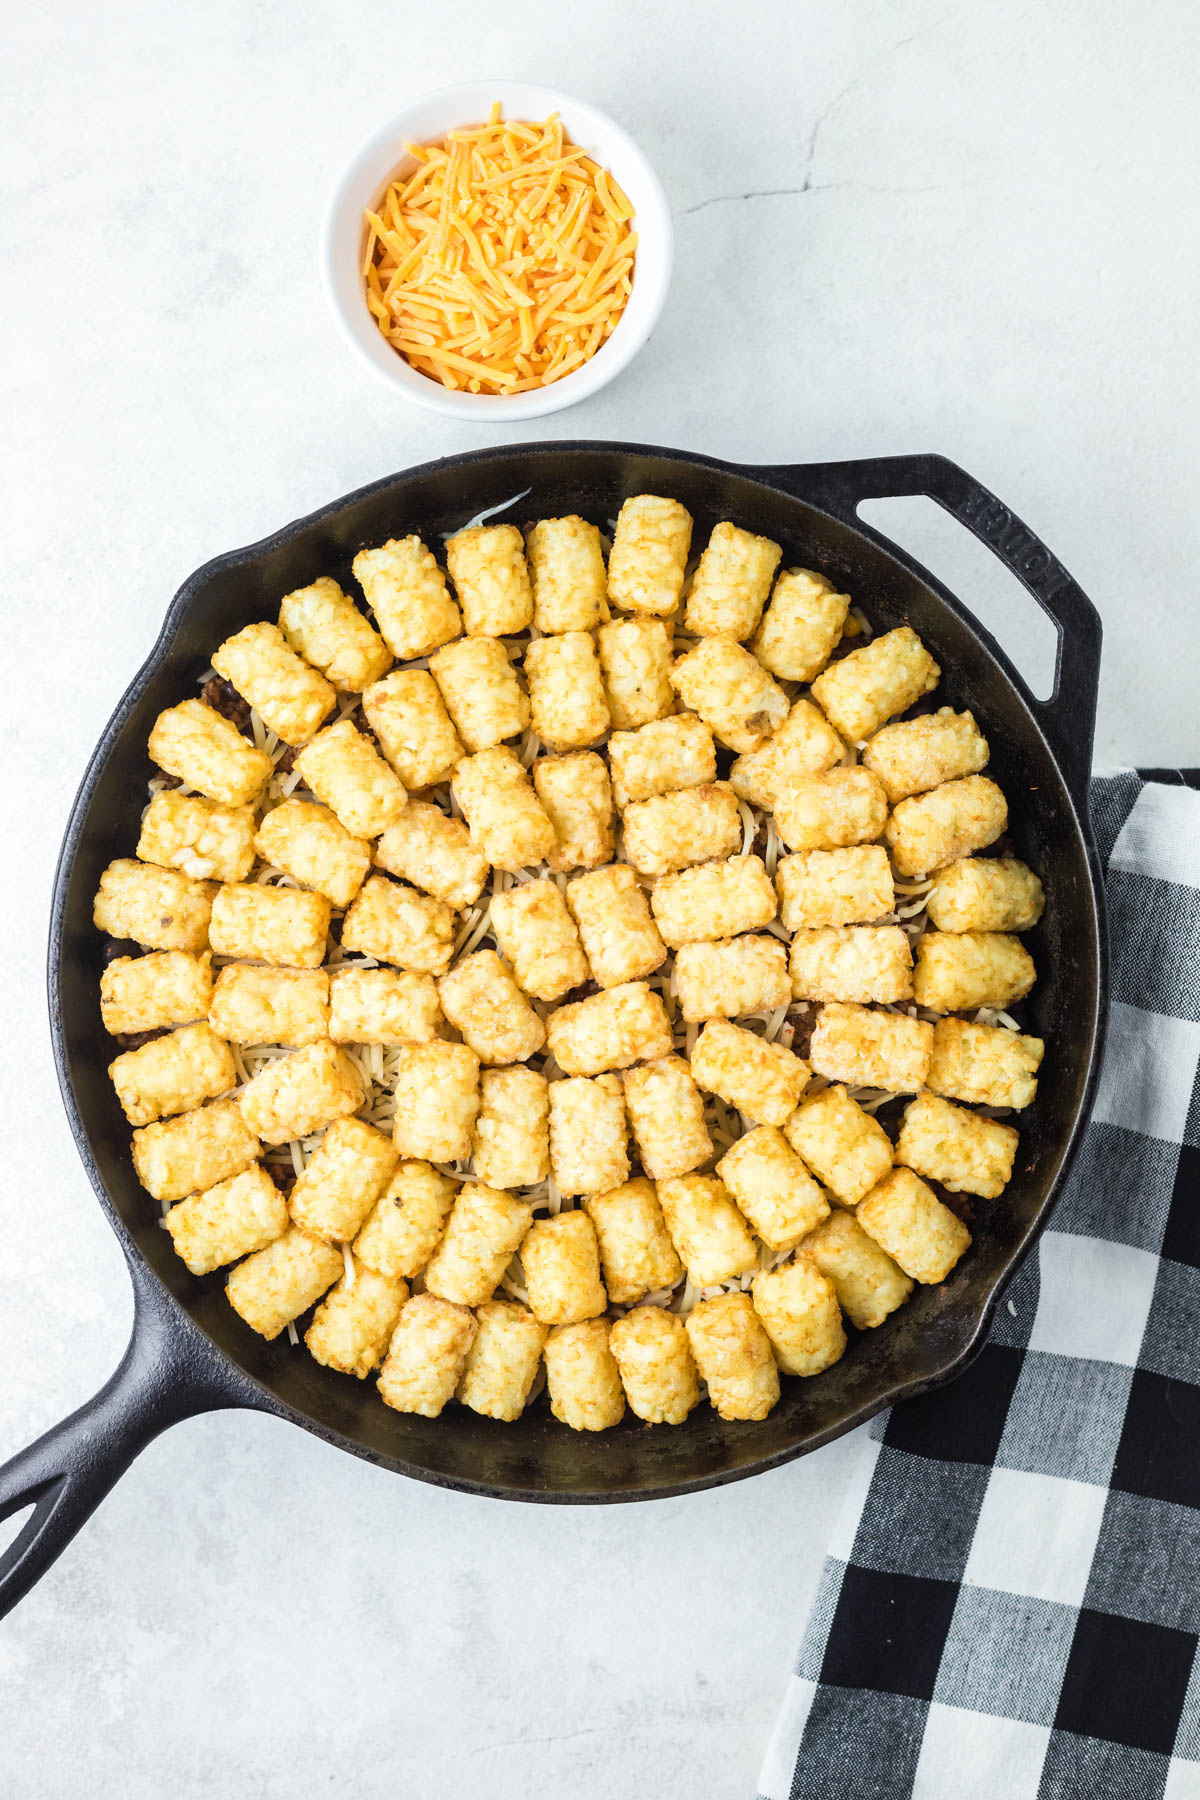 Uncooked tater tots are arranged in a single layer, with shredded cheese visible below them, in a black skillet. A bowl of shredded cheddar cheese is visible above the bowl. 